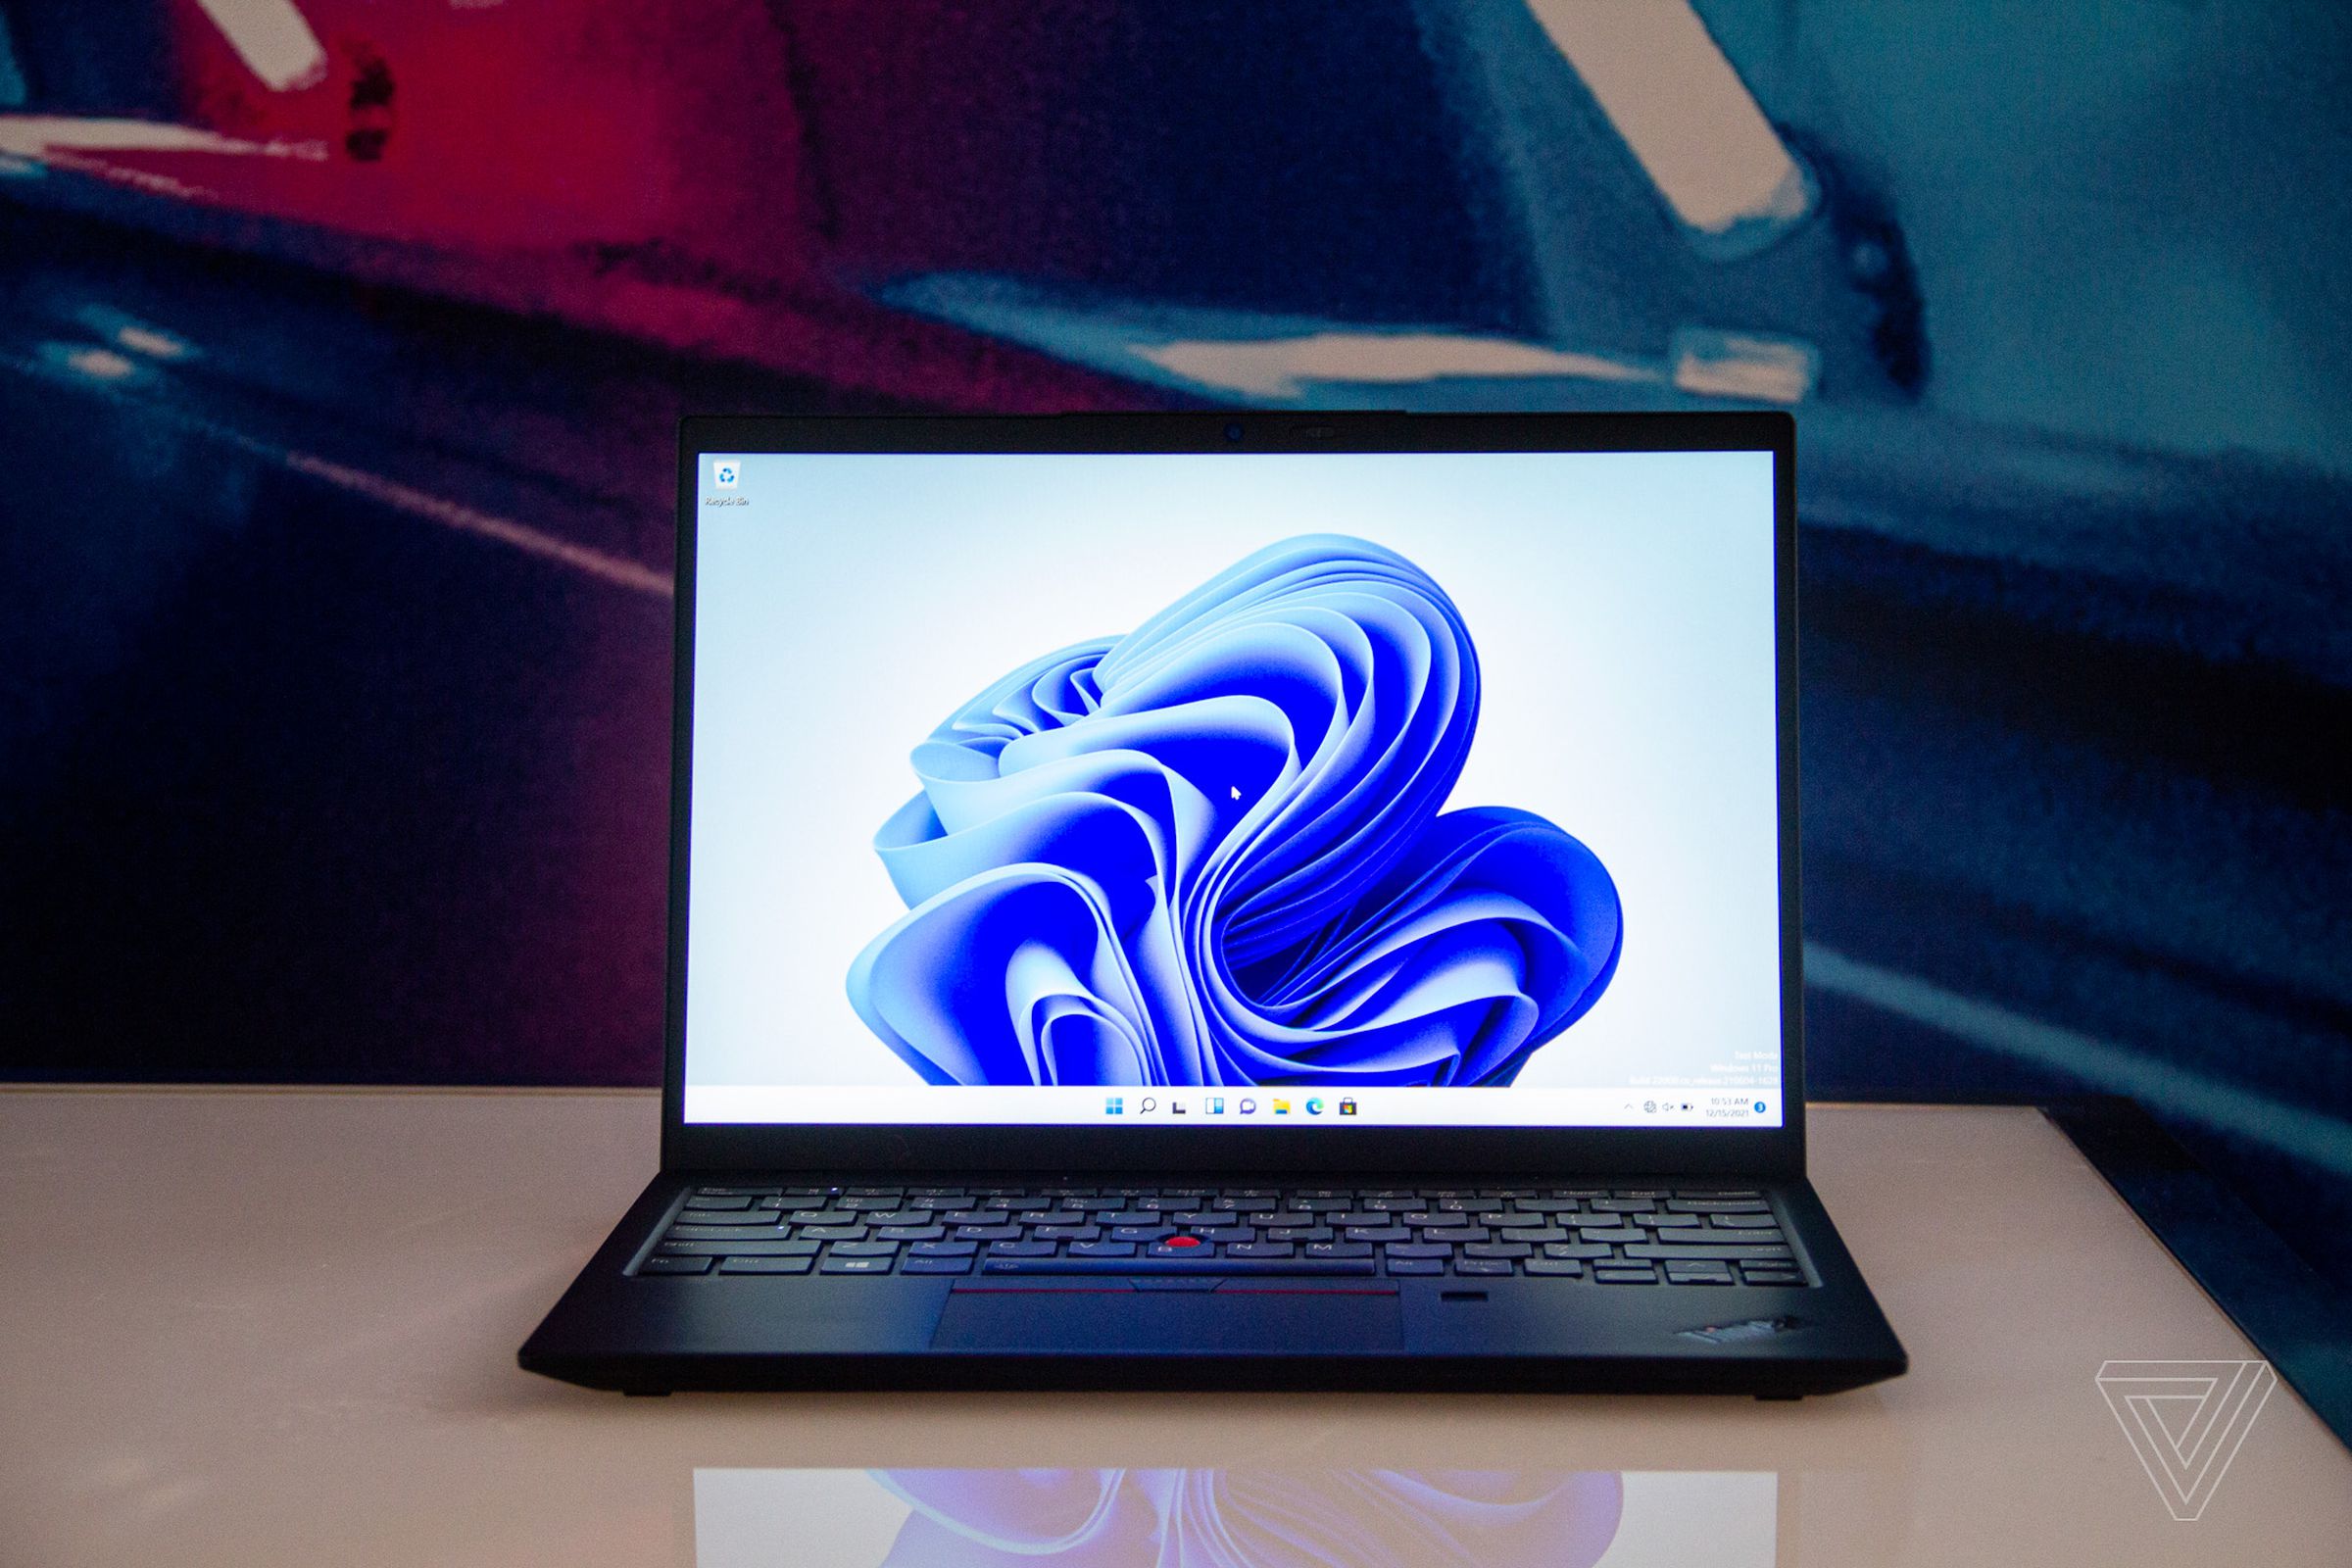 The ThinkPad X1 Nano 2nd-Gen open on white table. The screen displays a blue swirl on a white background.